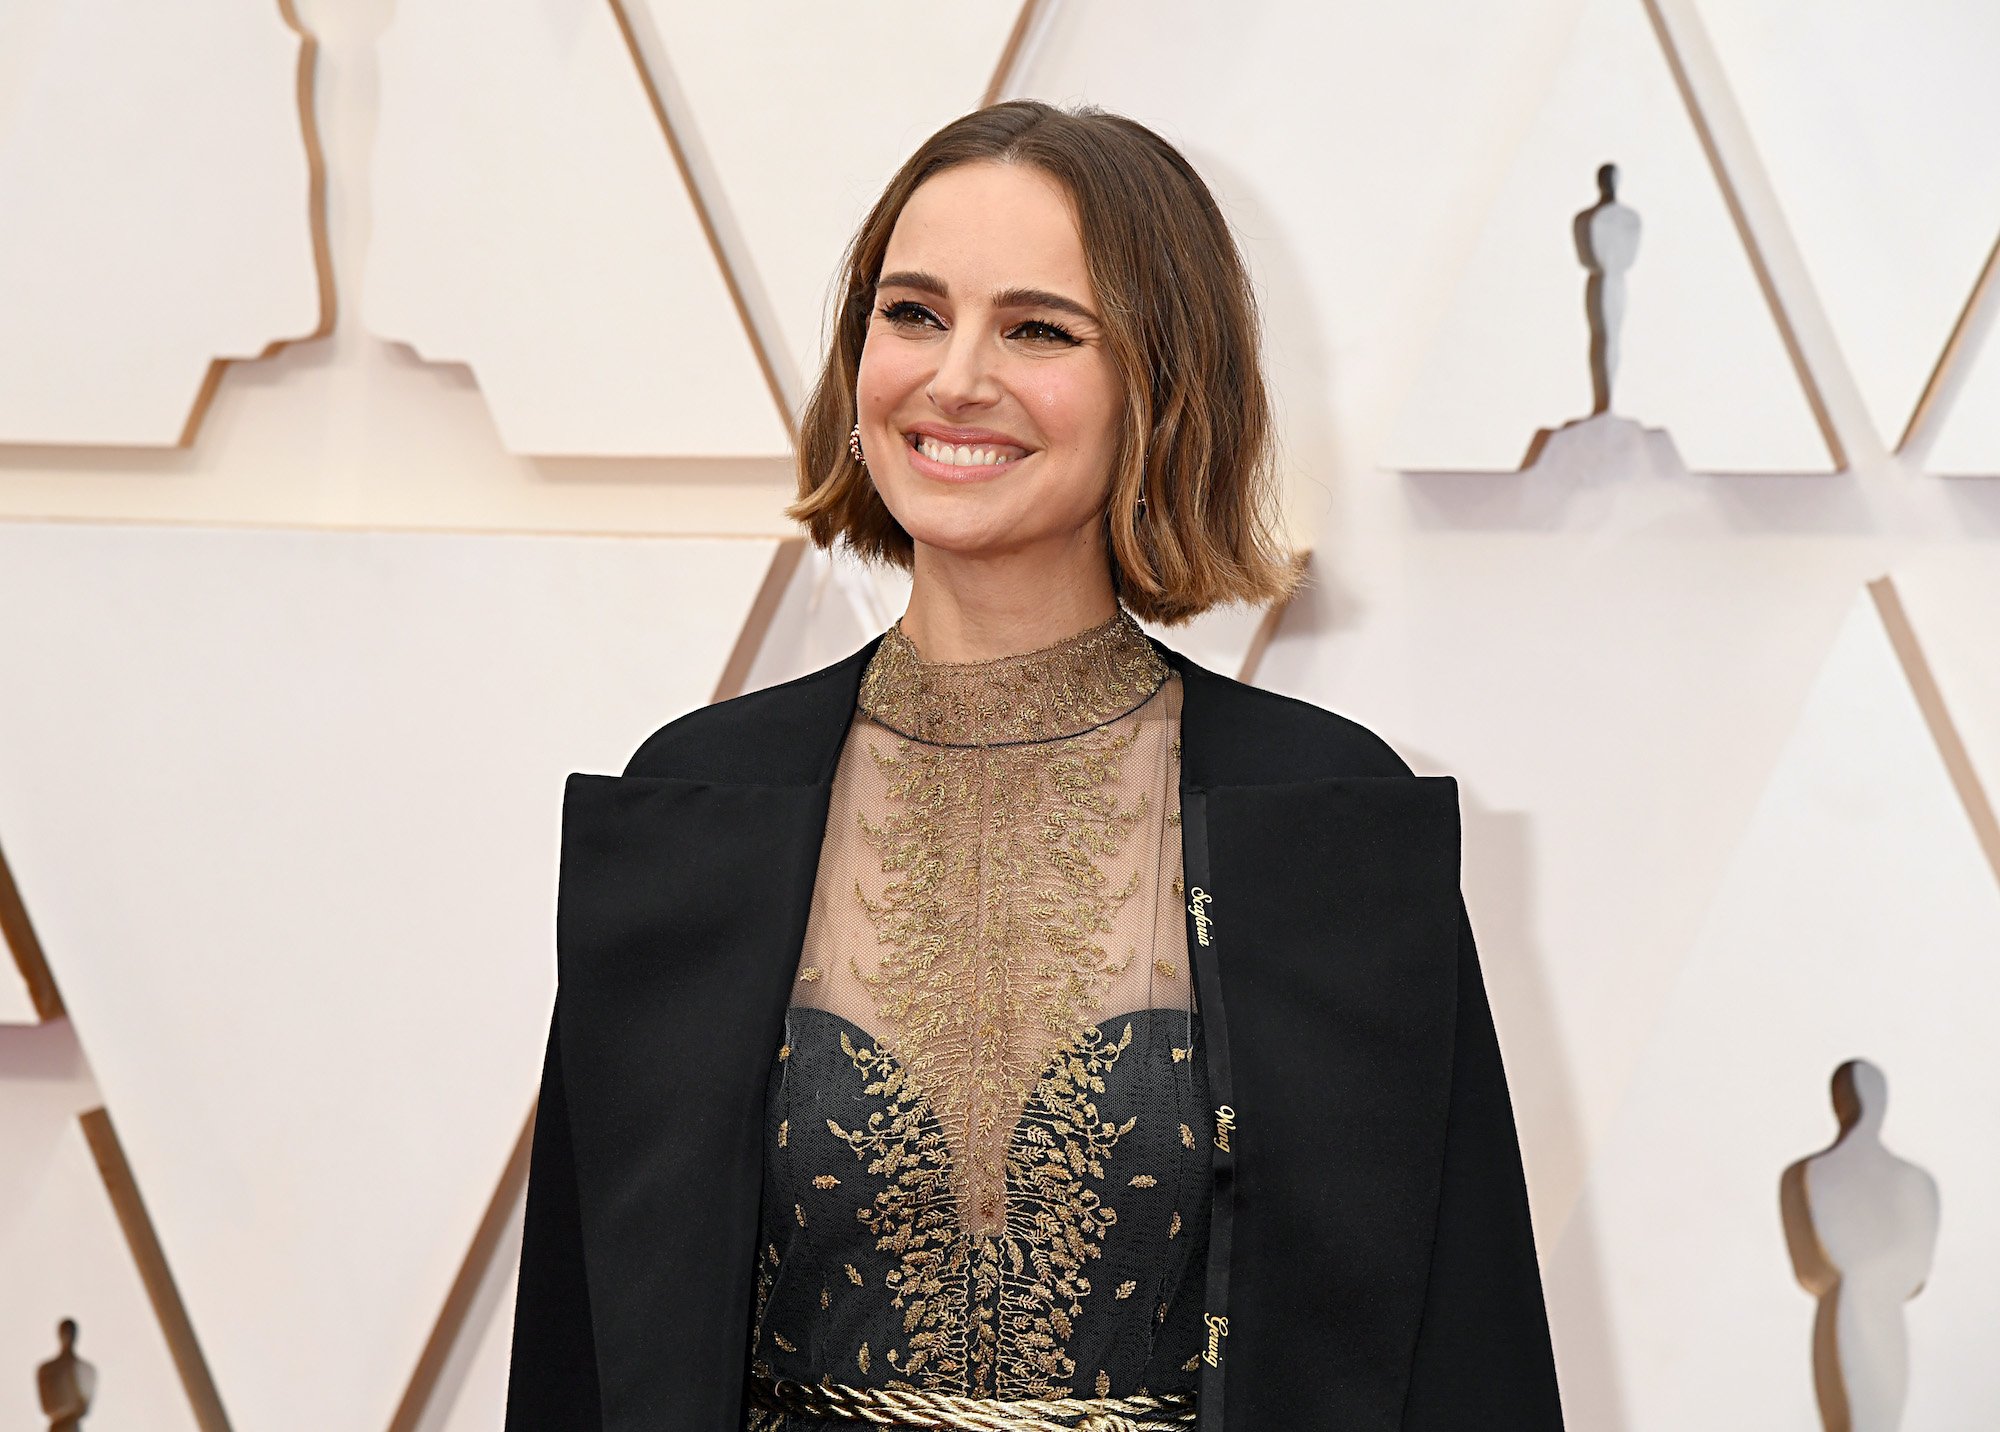 Natalie Portman smiling in front of a white background